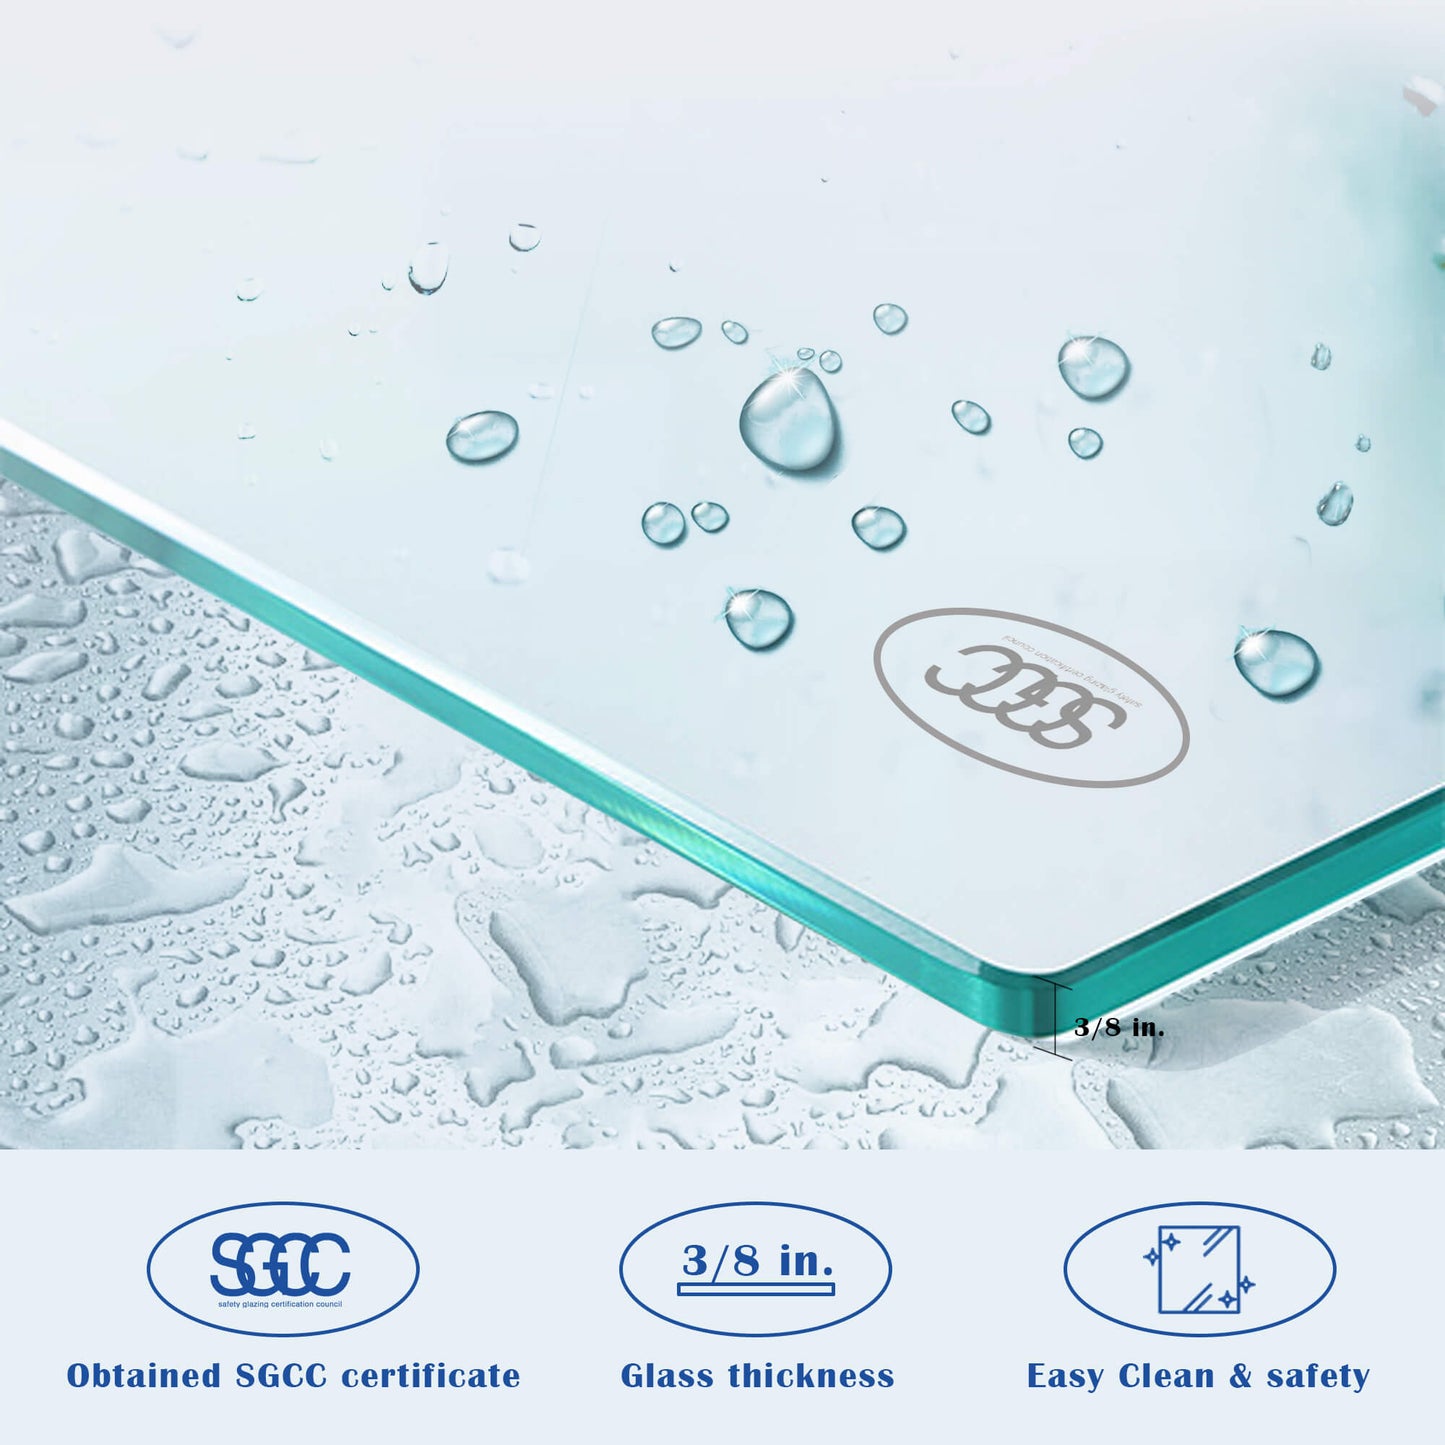 MCOCOD SS05 Single Sliding Frameless Shower Door, Easy Clean & Safety, SGCC Tempered Glass, 3/8 in. Glass Thickness